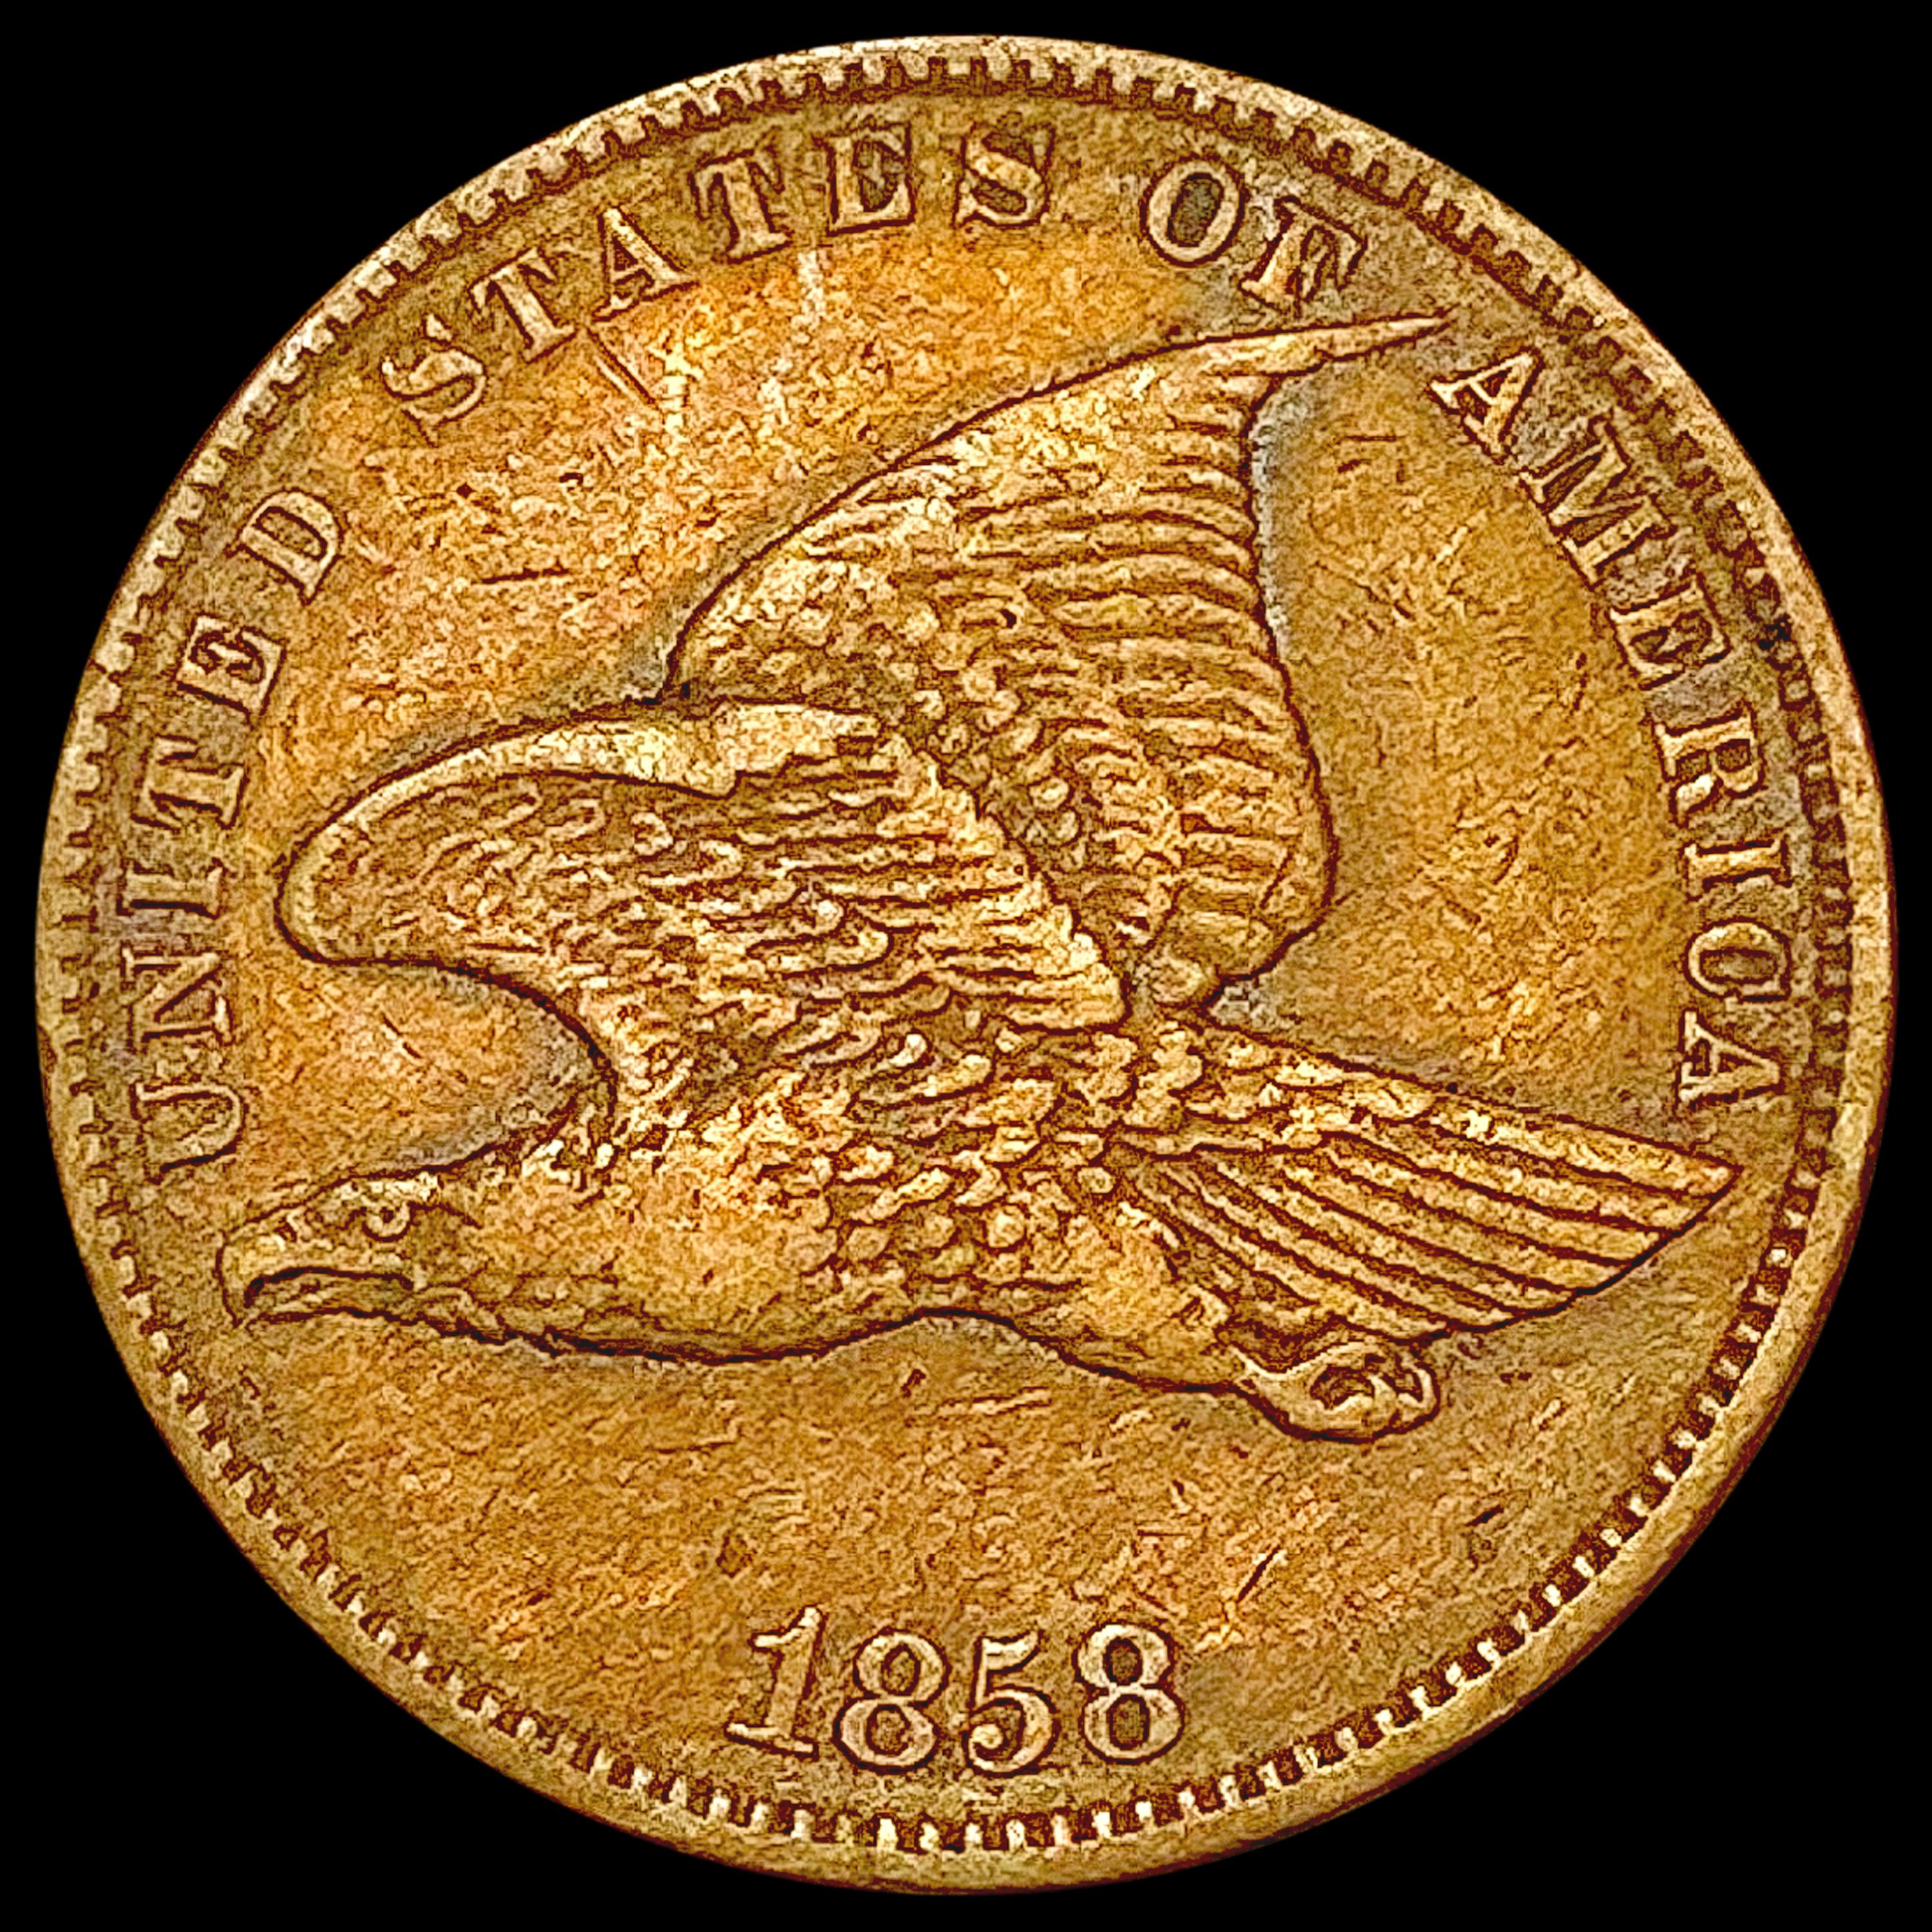 1858 Sm Ltrs Flying Eagle Cent NEARLY UNCIRCULATED